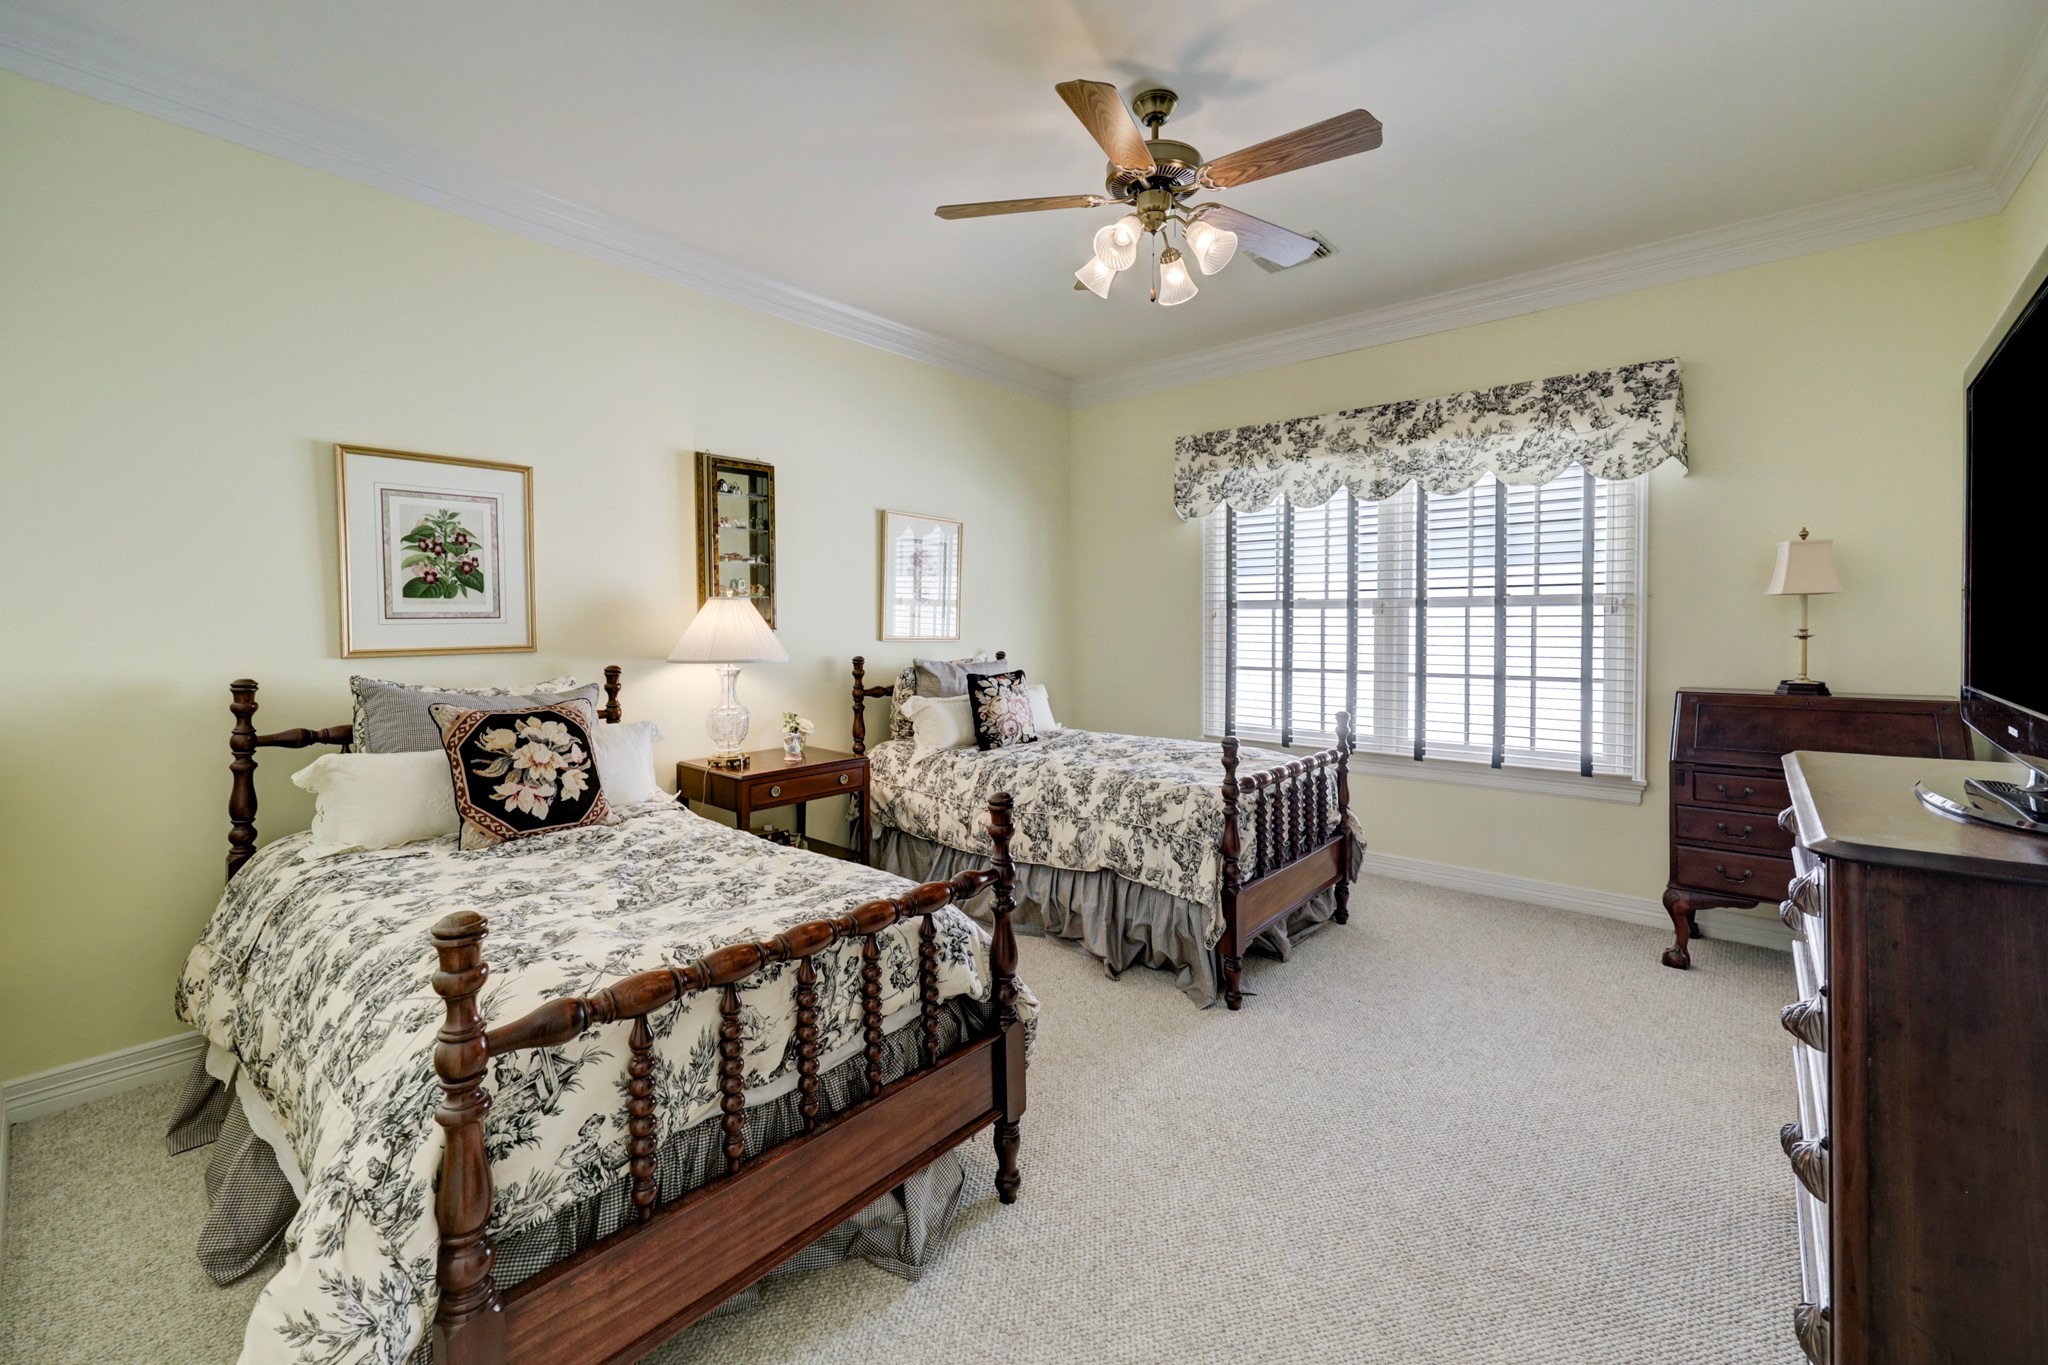 Guest bedroom located on the second floor with en suite bathroom, carpet and walk-in closet.
